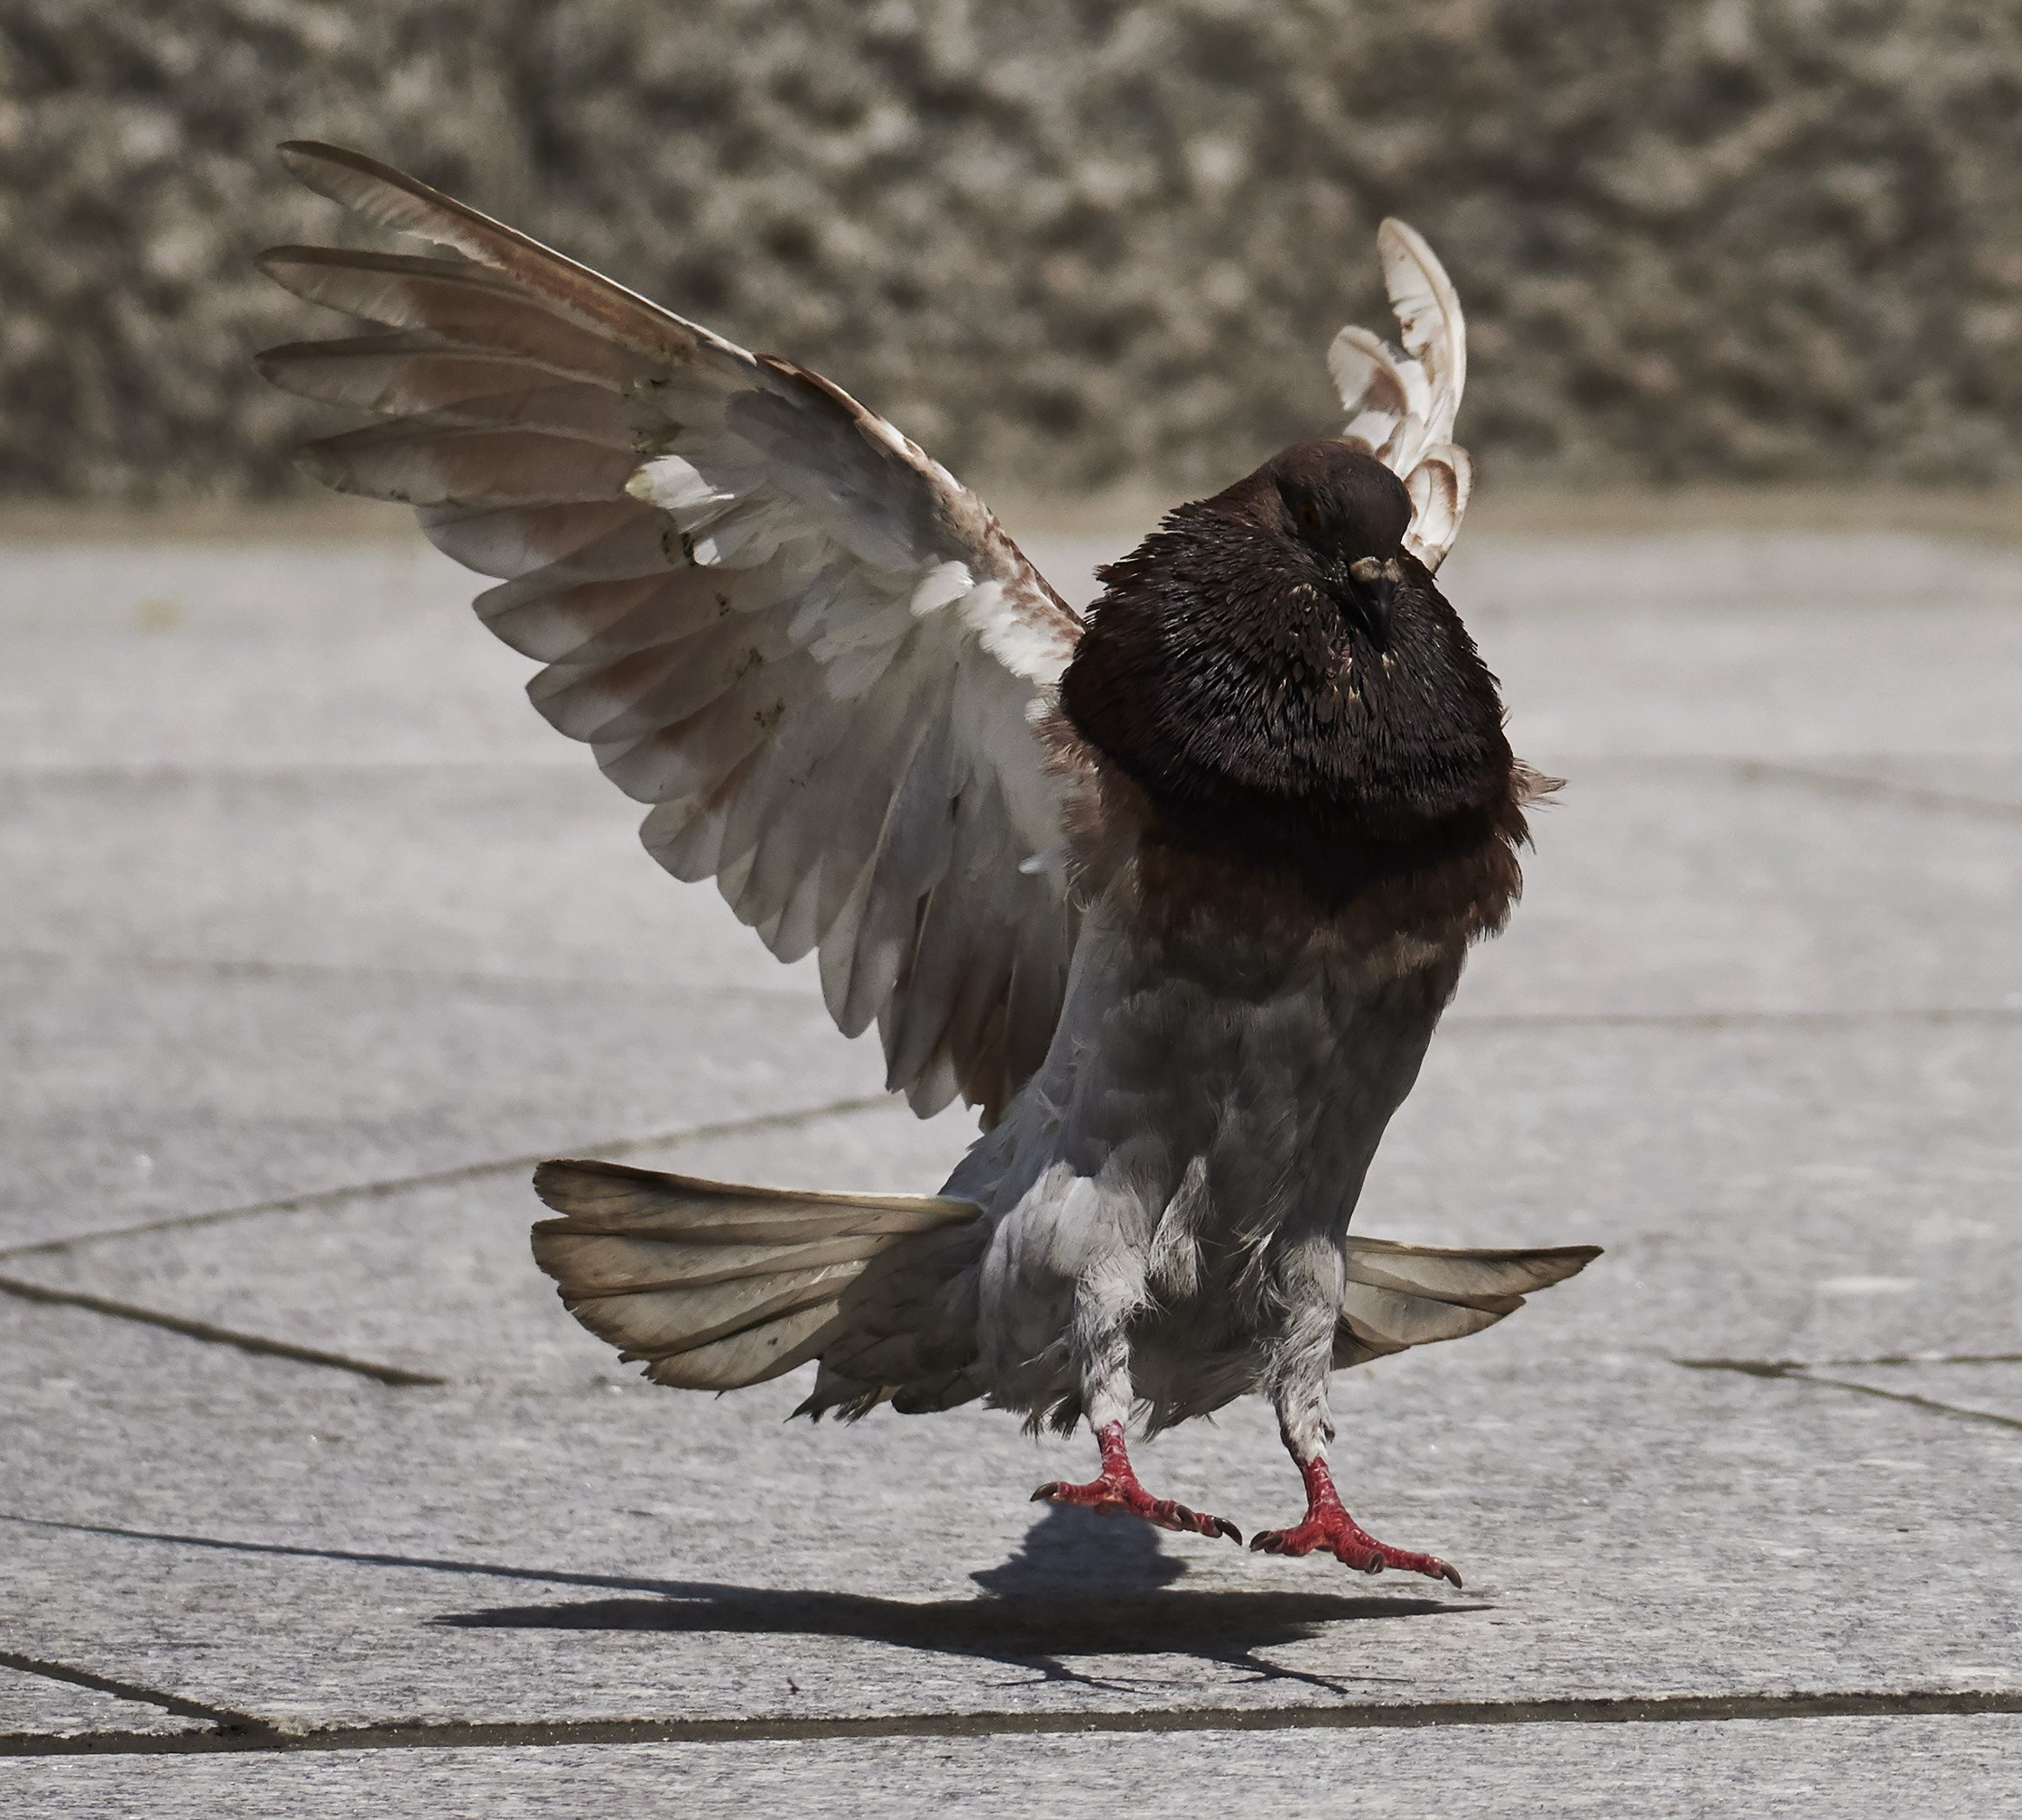 a pigeon with its wings spread